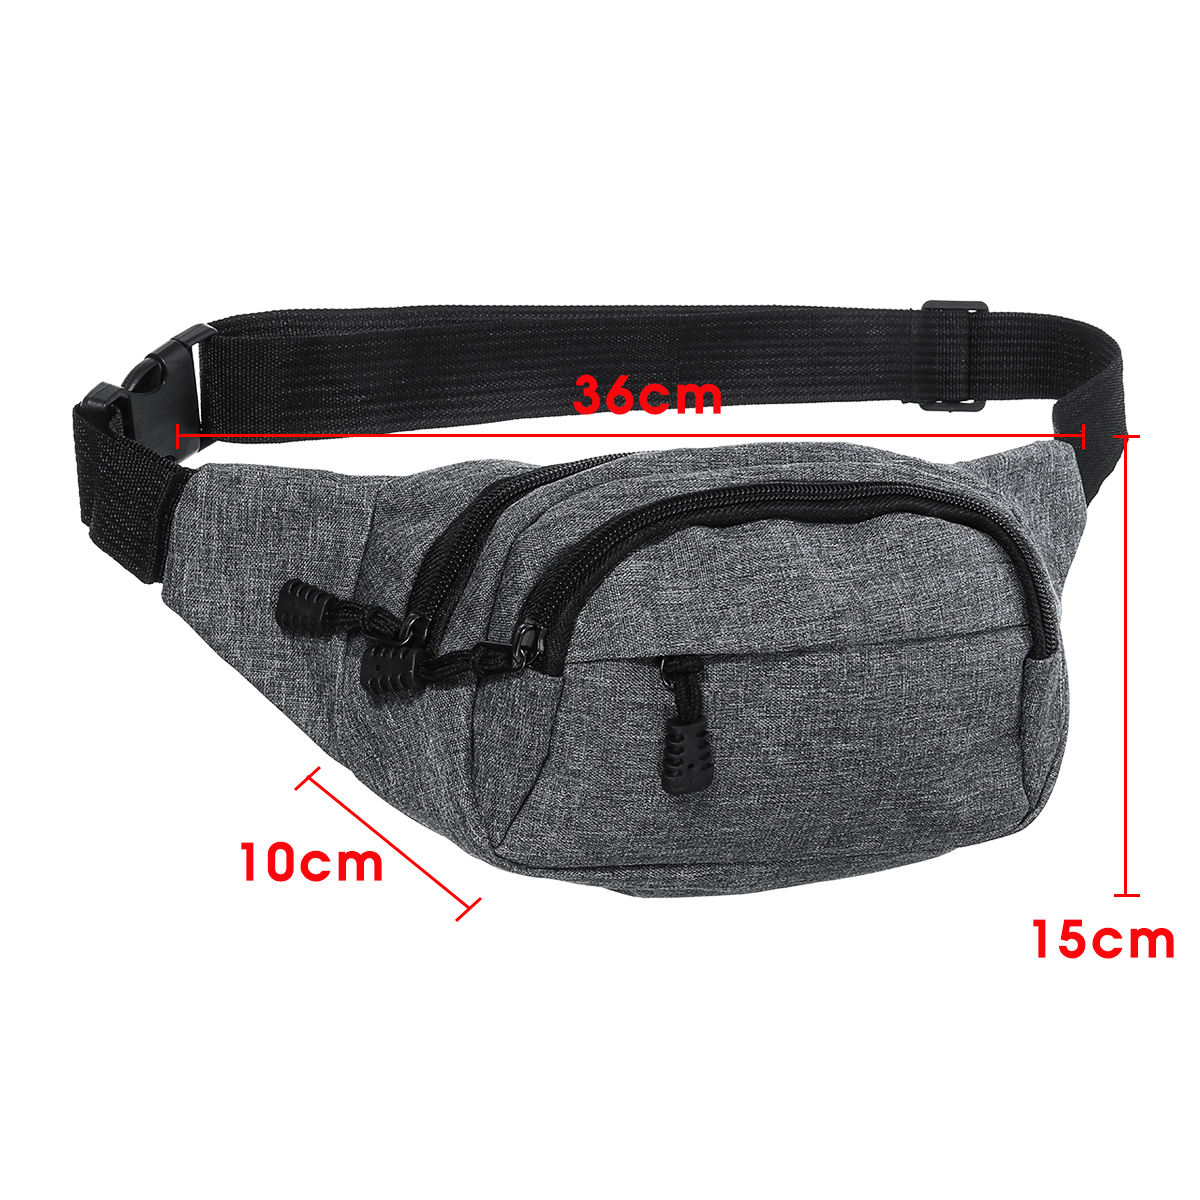 Large-Capacity-Sports-Waist-Bag-Phone-Bag-Crossnody-Bag-For-Outdoor-Sports-Hiking-Jogging-Running-1534489-5